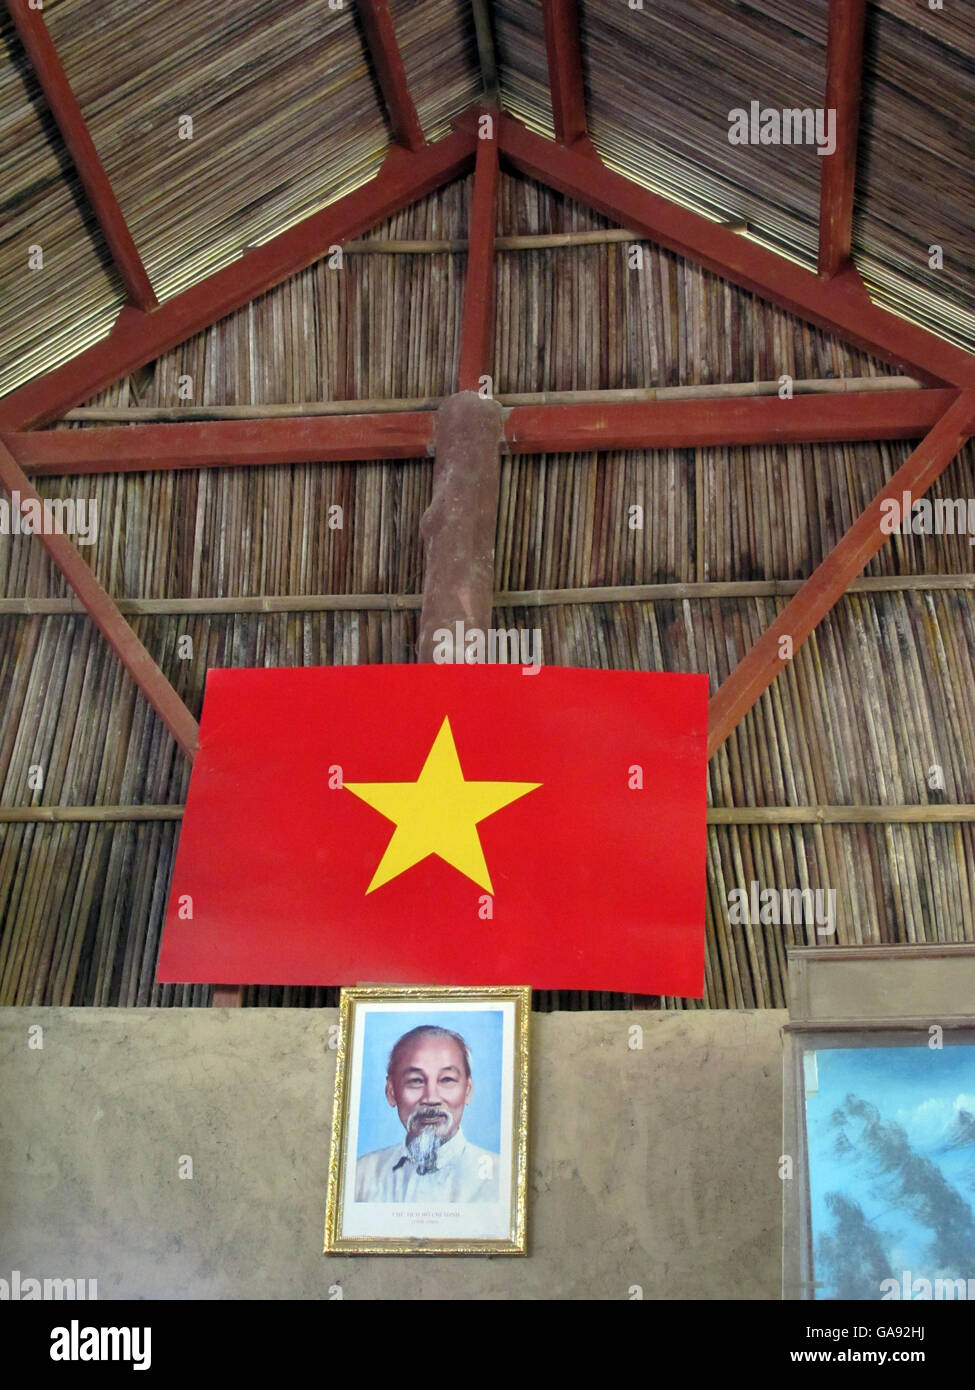 Flag of Vietnam and portrait of Ho Chi Minh are displayed at the site of Cu Chi Tunnels in Vietnam. Stock Photo